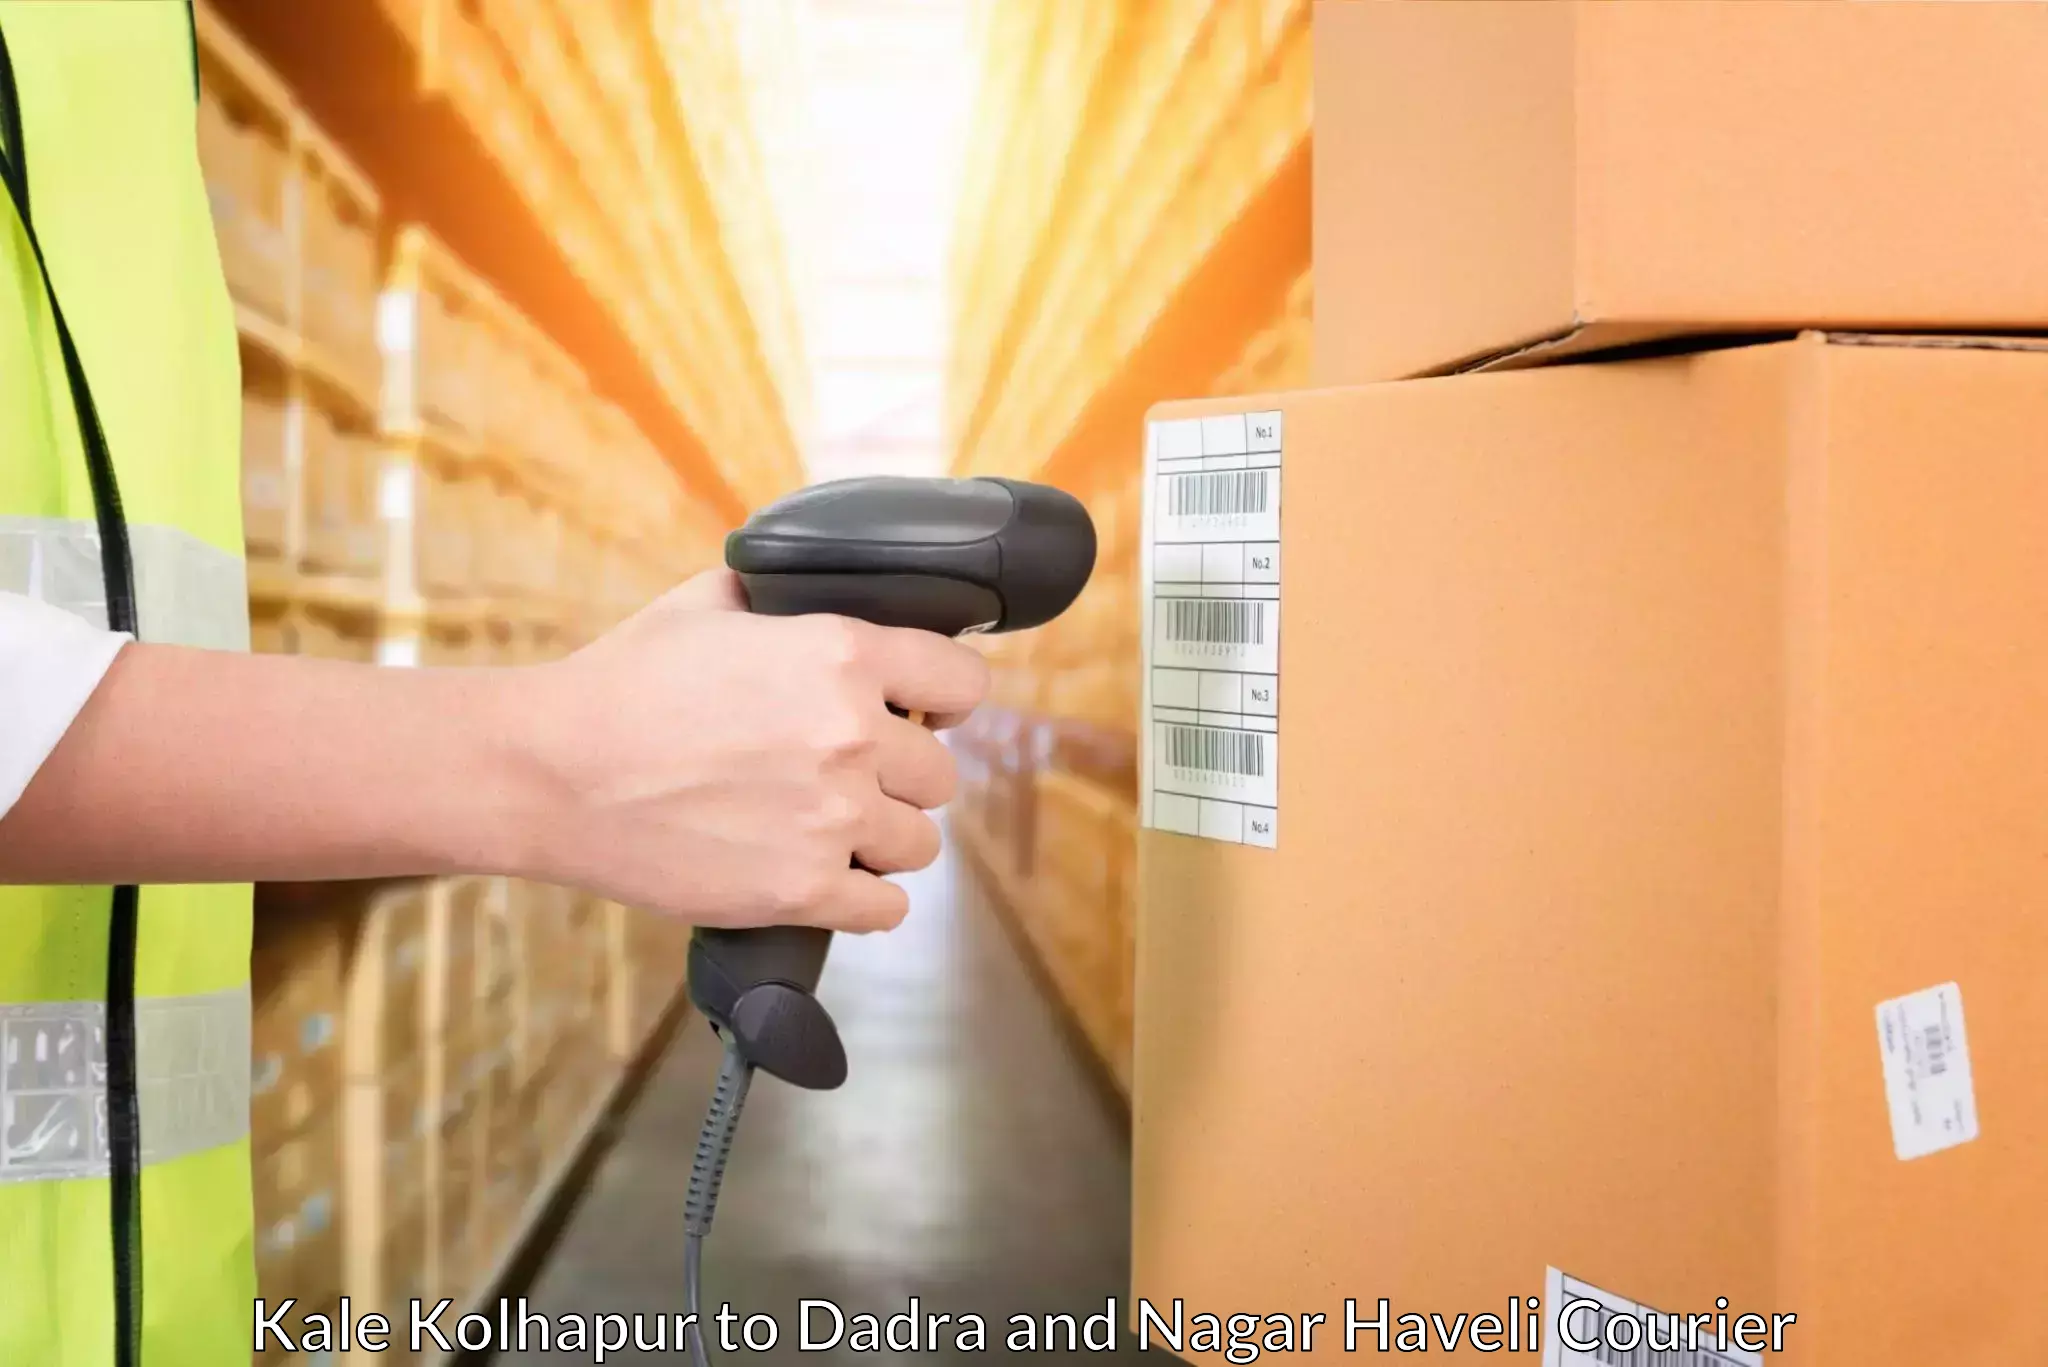 Courier service booking in Kale Kolhapur to Silvassa